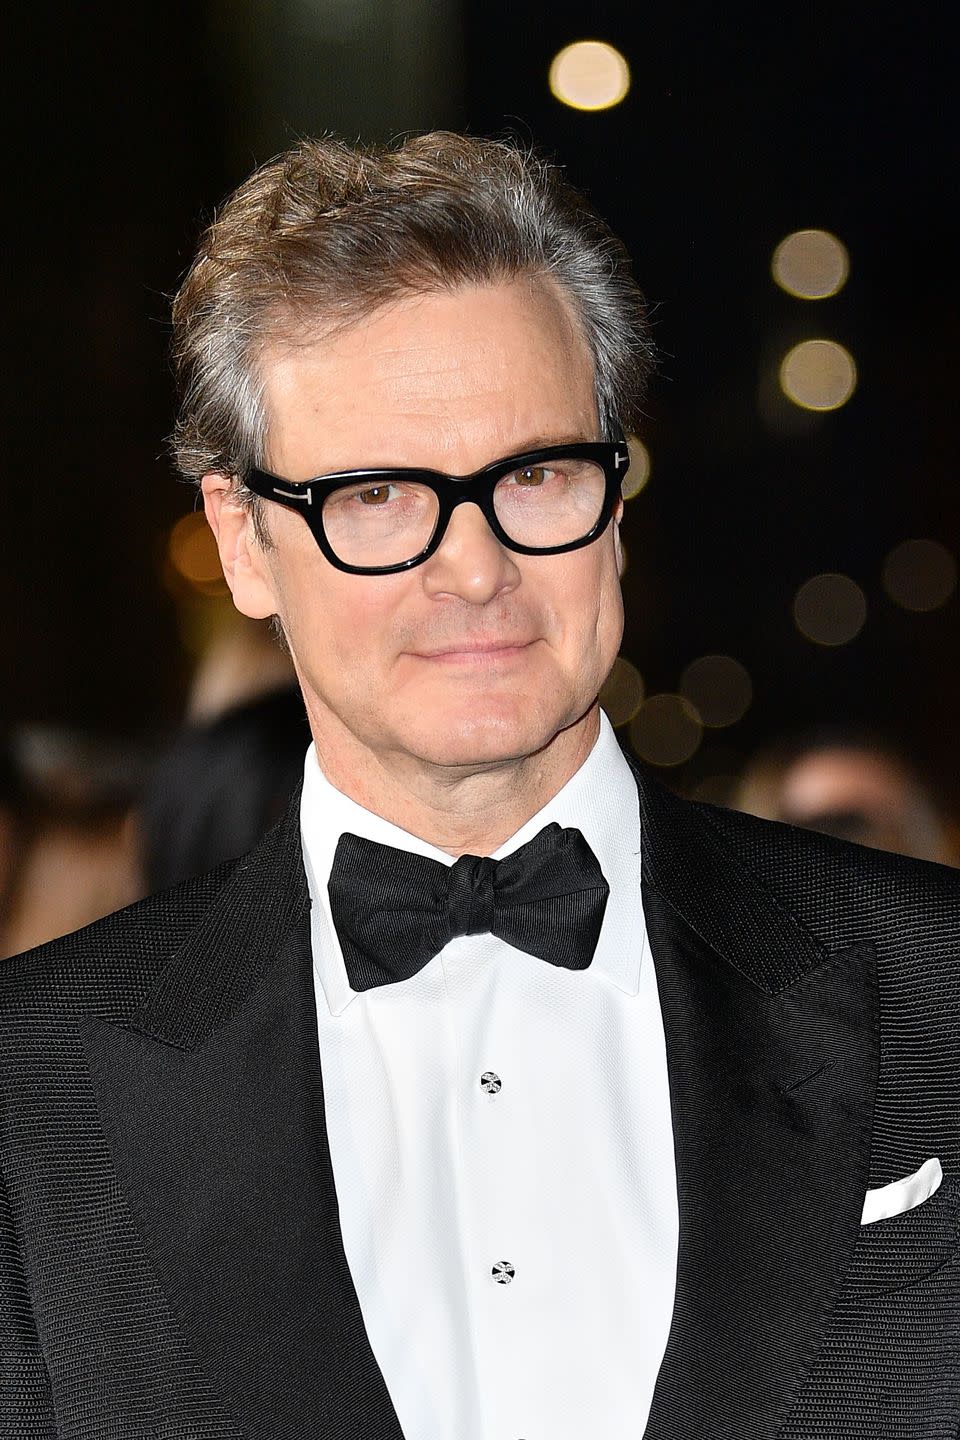 Now: Colin Firth